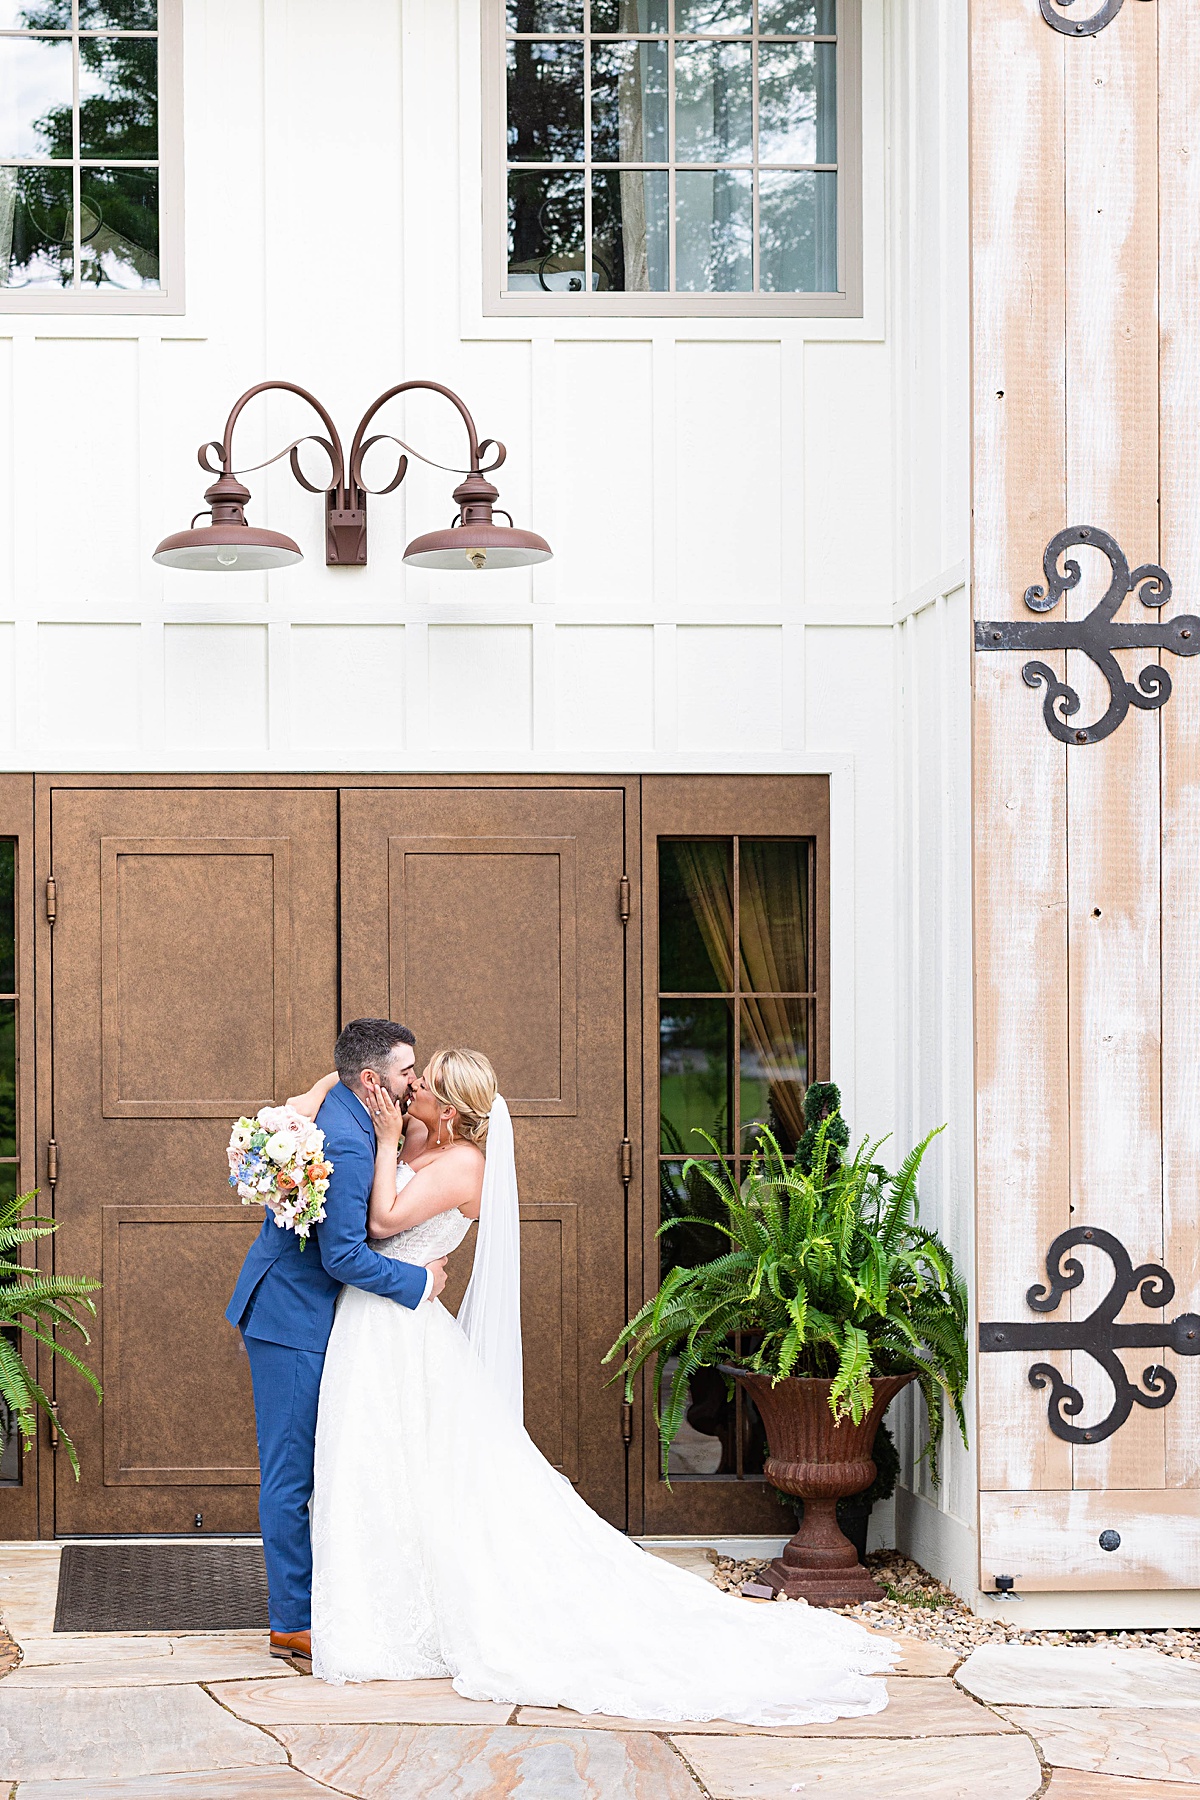 Bride and groom photos for this rustic elegance Seclusion Wedding in Lexington, Virginia.